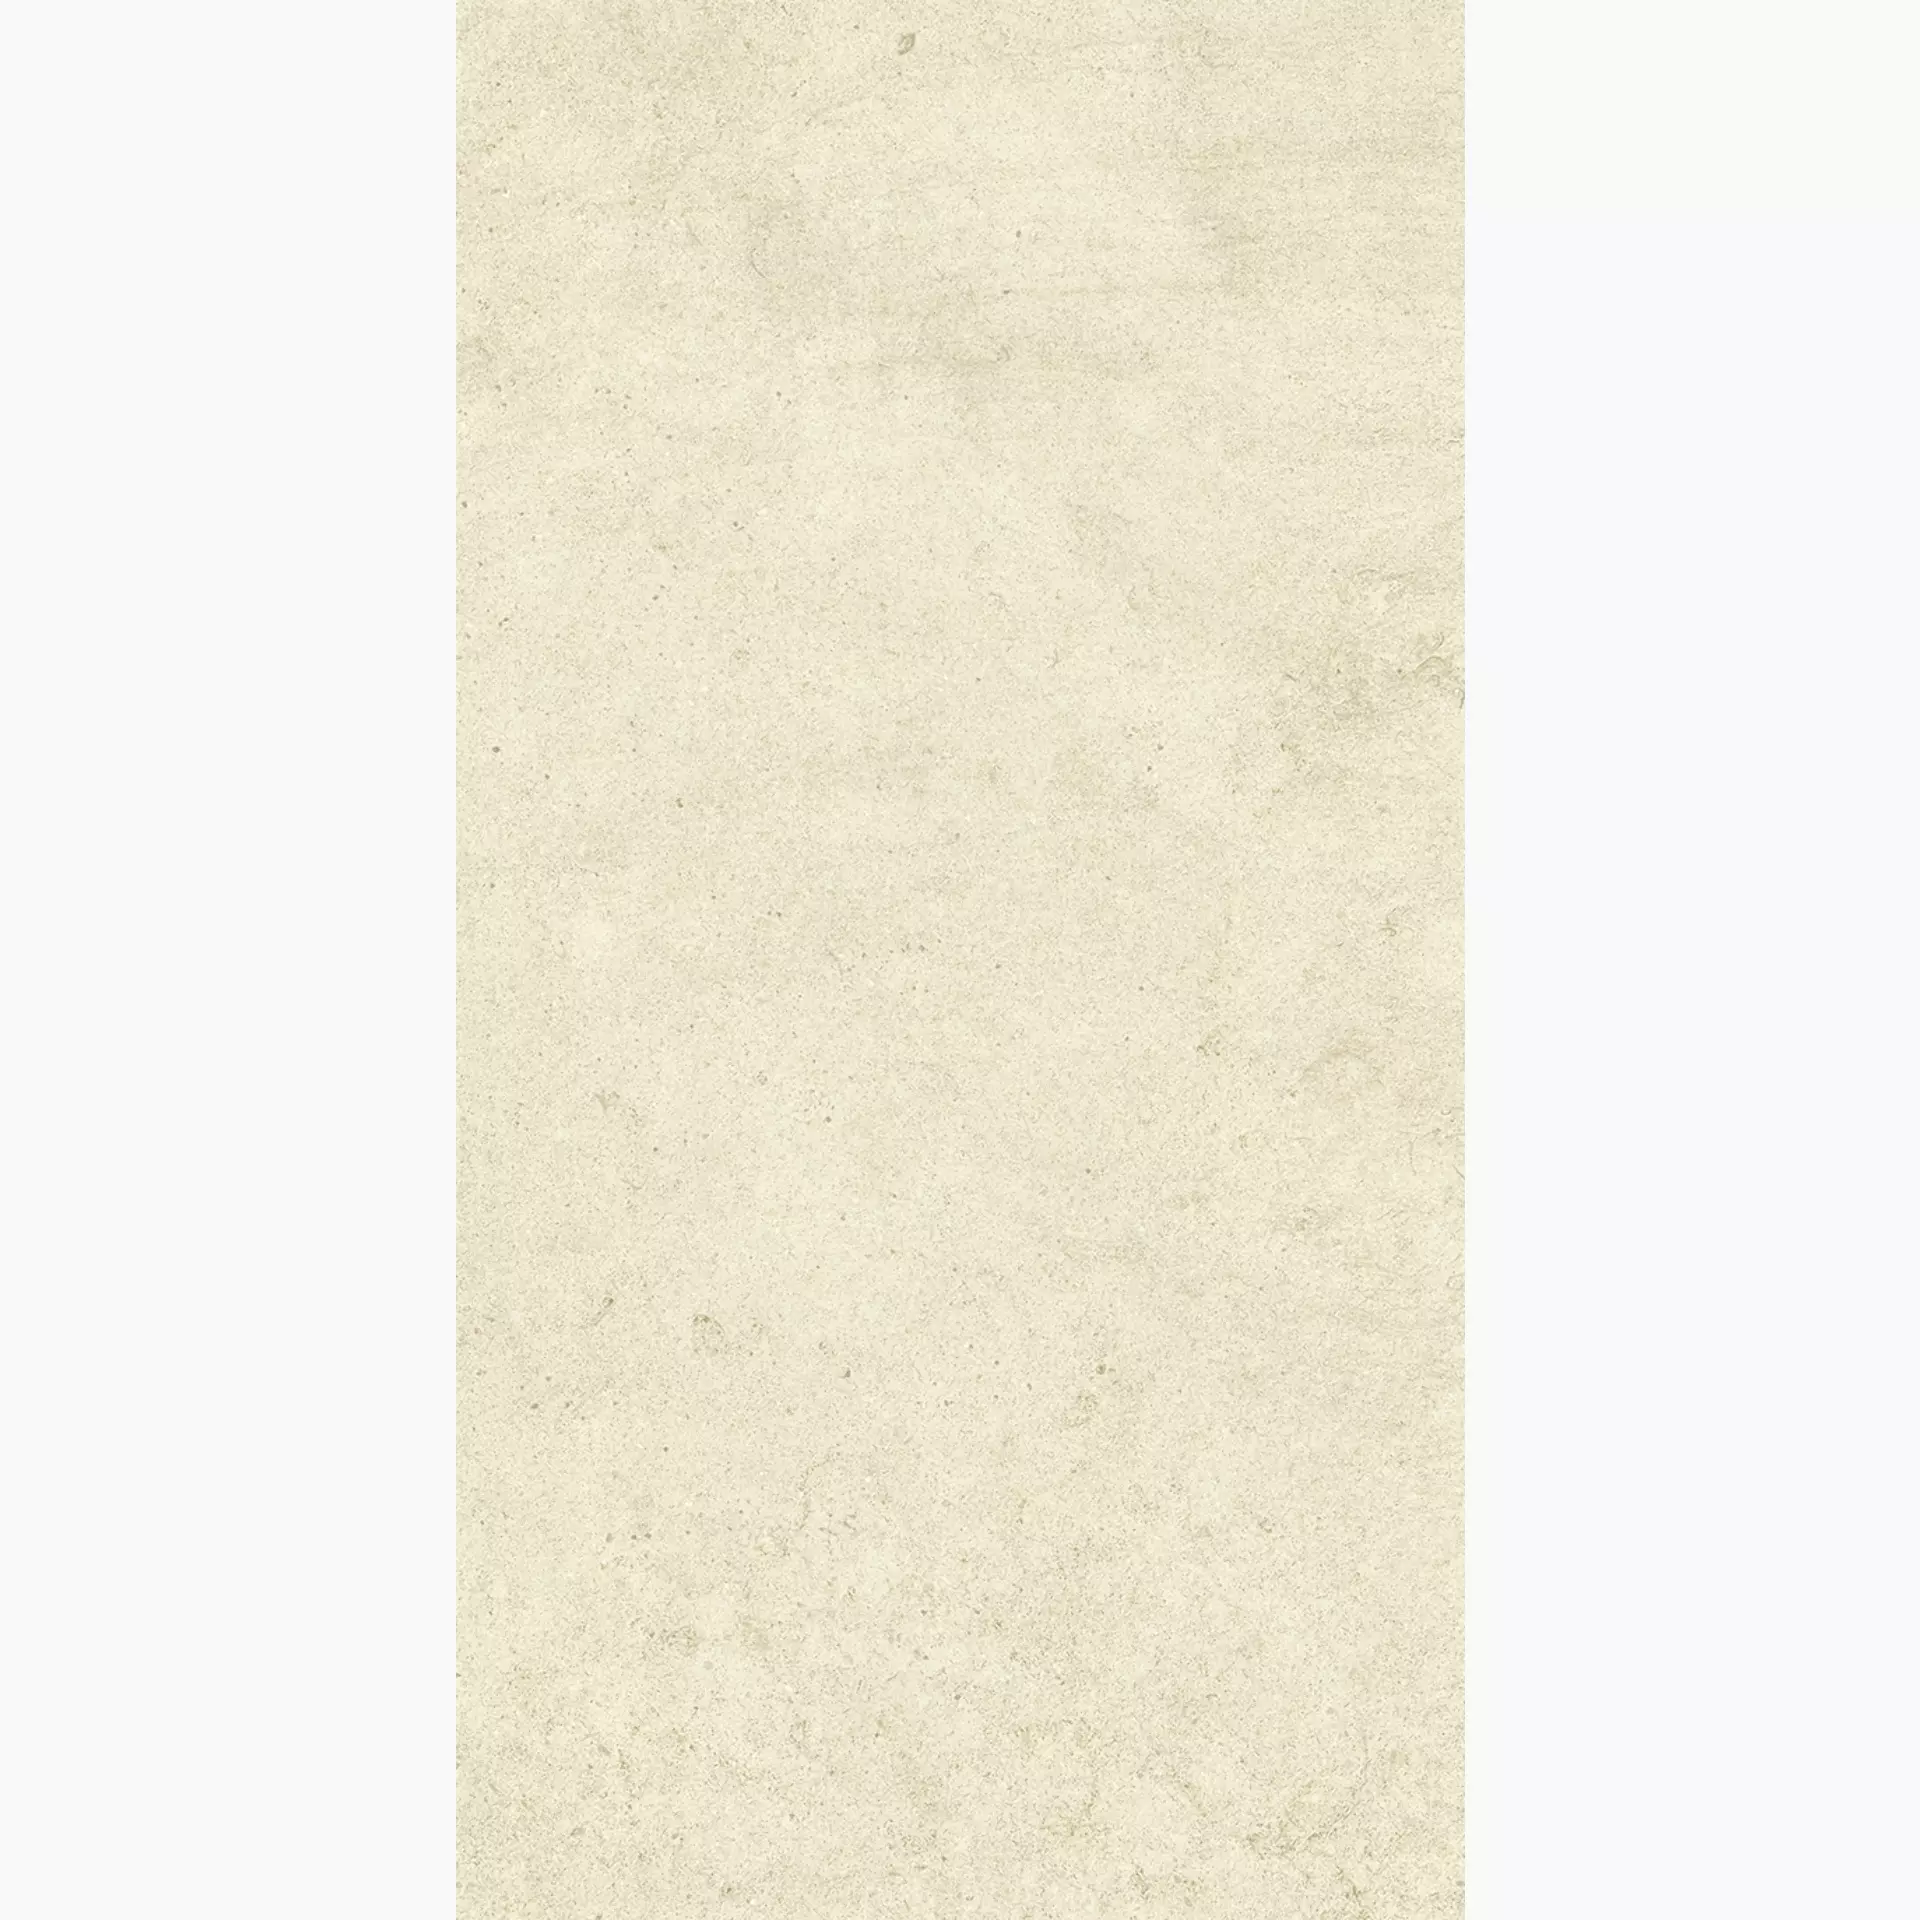 Margres Hybrid White Touch B2562HB1T 60x120cm rectified 11mm